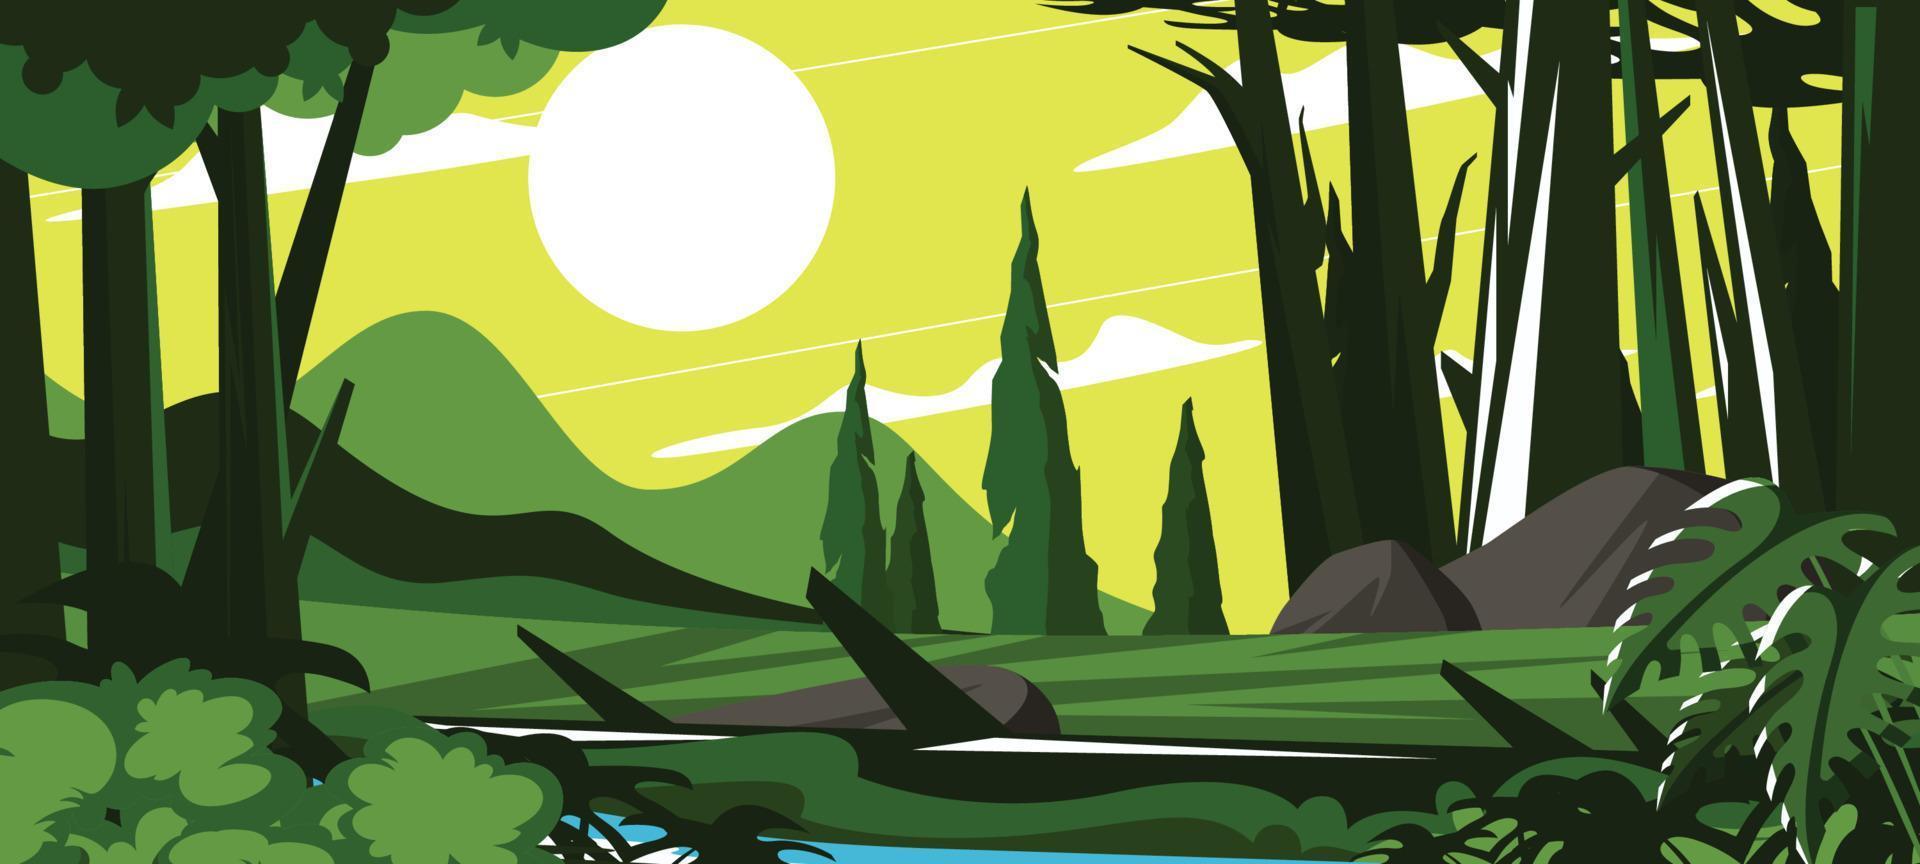 Summer Forest Scenery with Glowing Sun vector